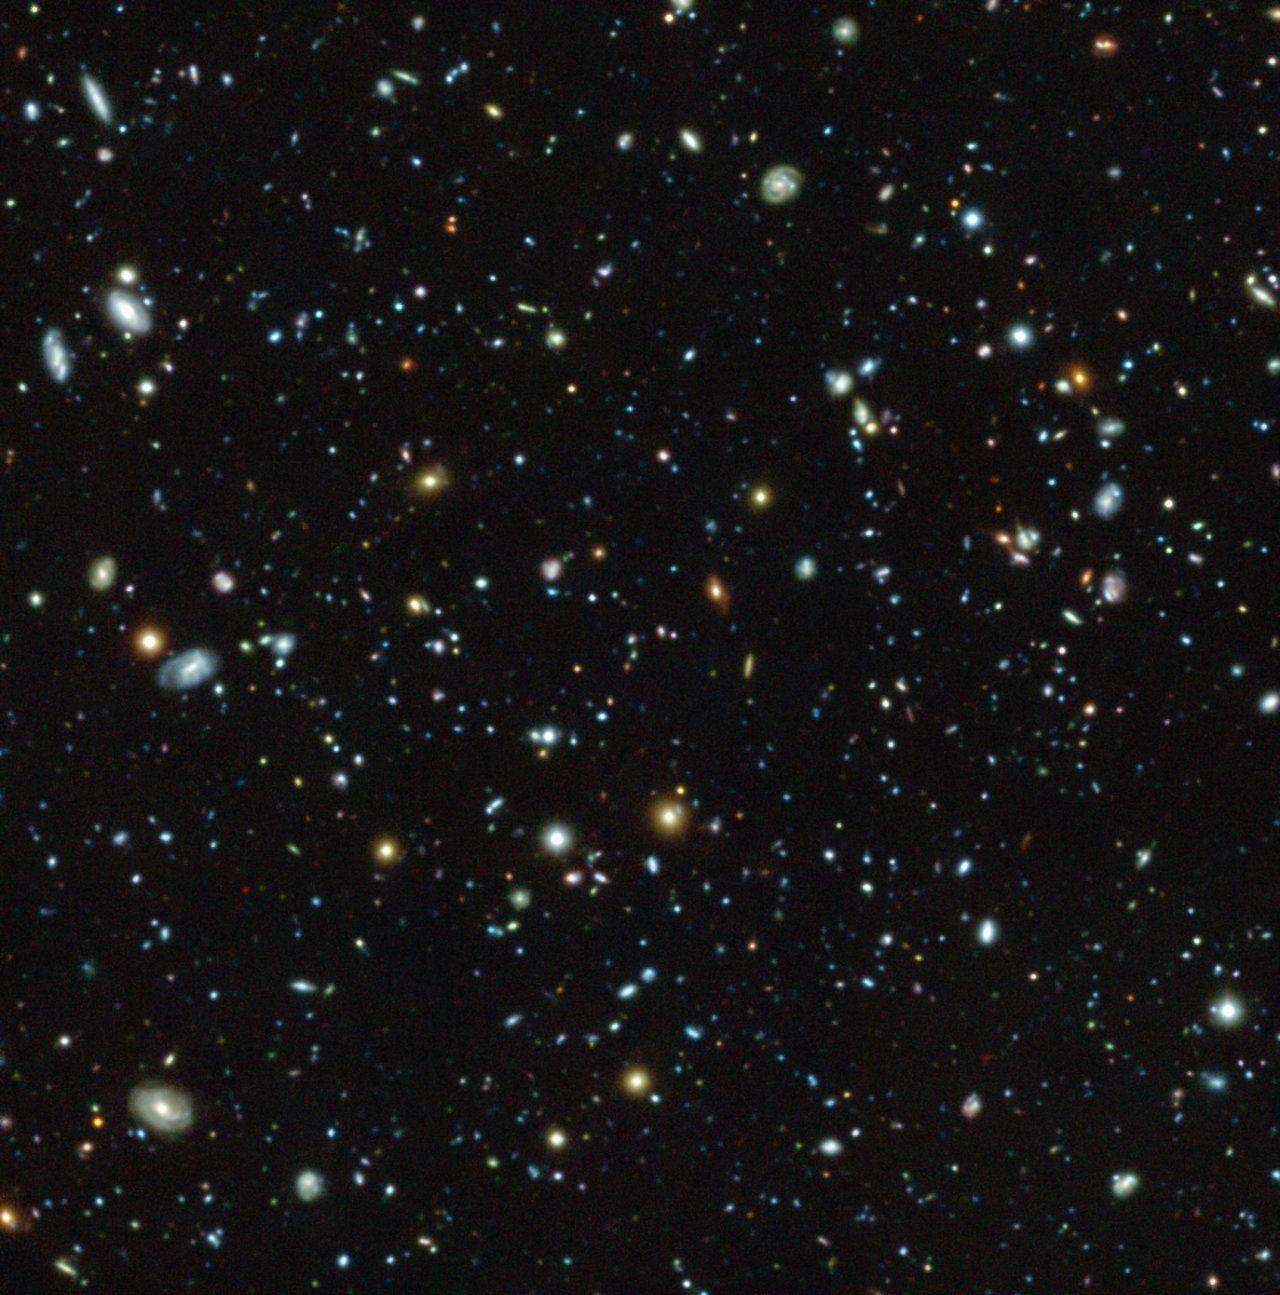 The Hubble Ultra Deep Field seen with MUSE